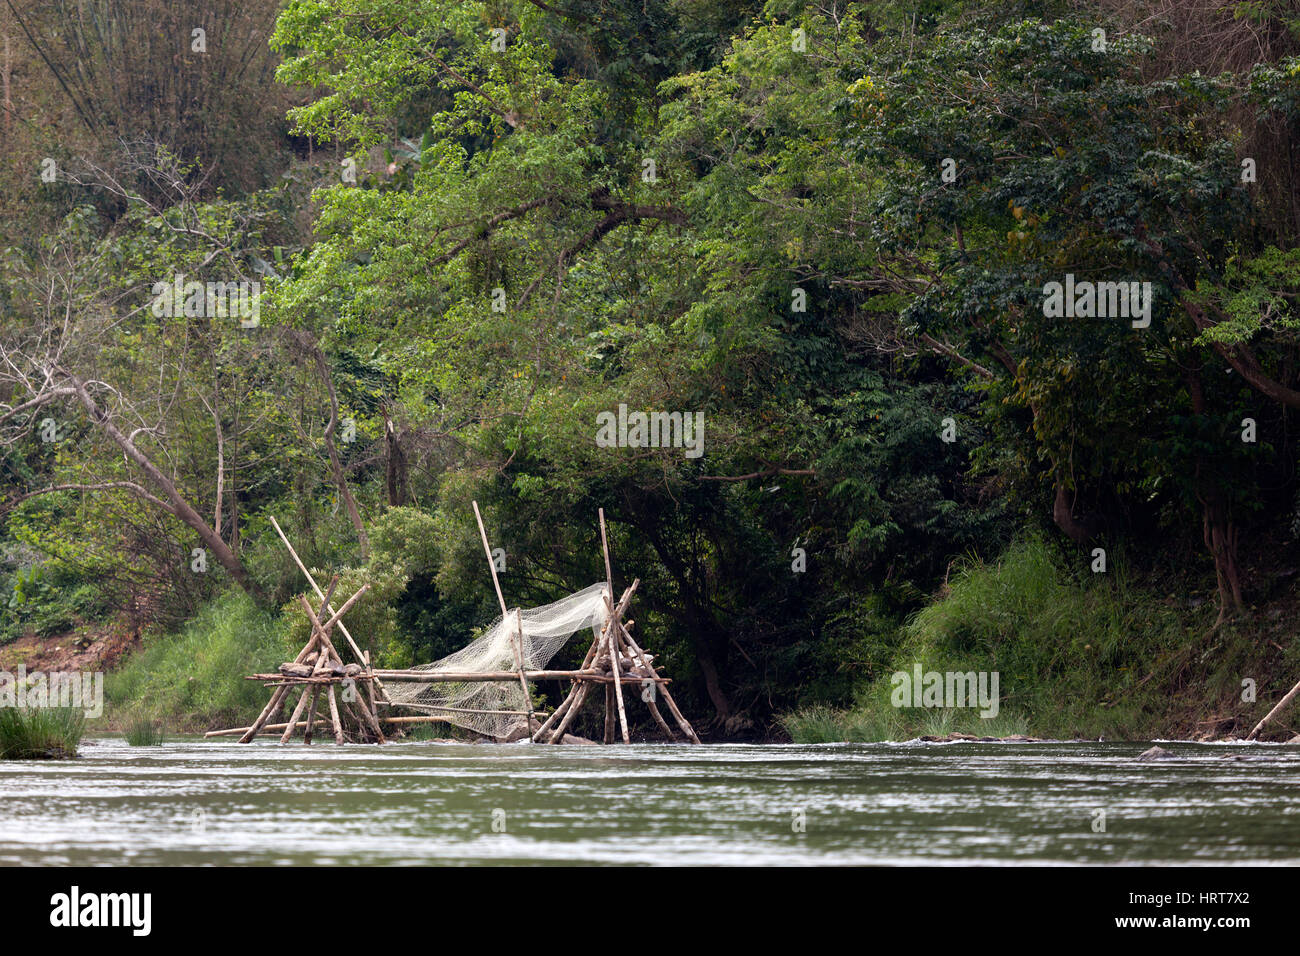 A branch structure with net for a fish trap on the Ou river, a tributary of the Mekong. Structure de branchages et filet pour un piège à poissons. Stock Photo